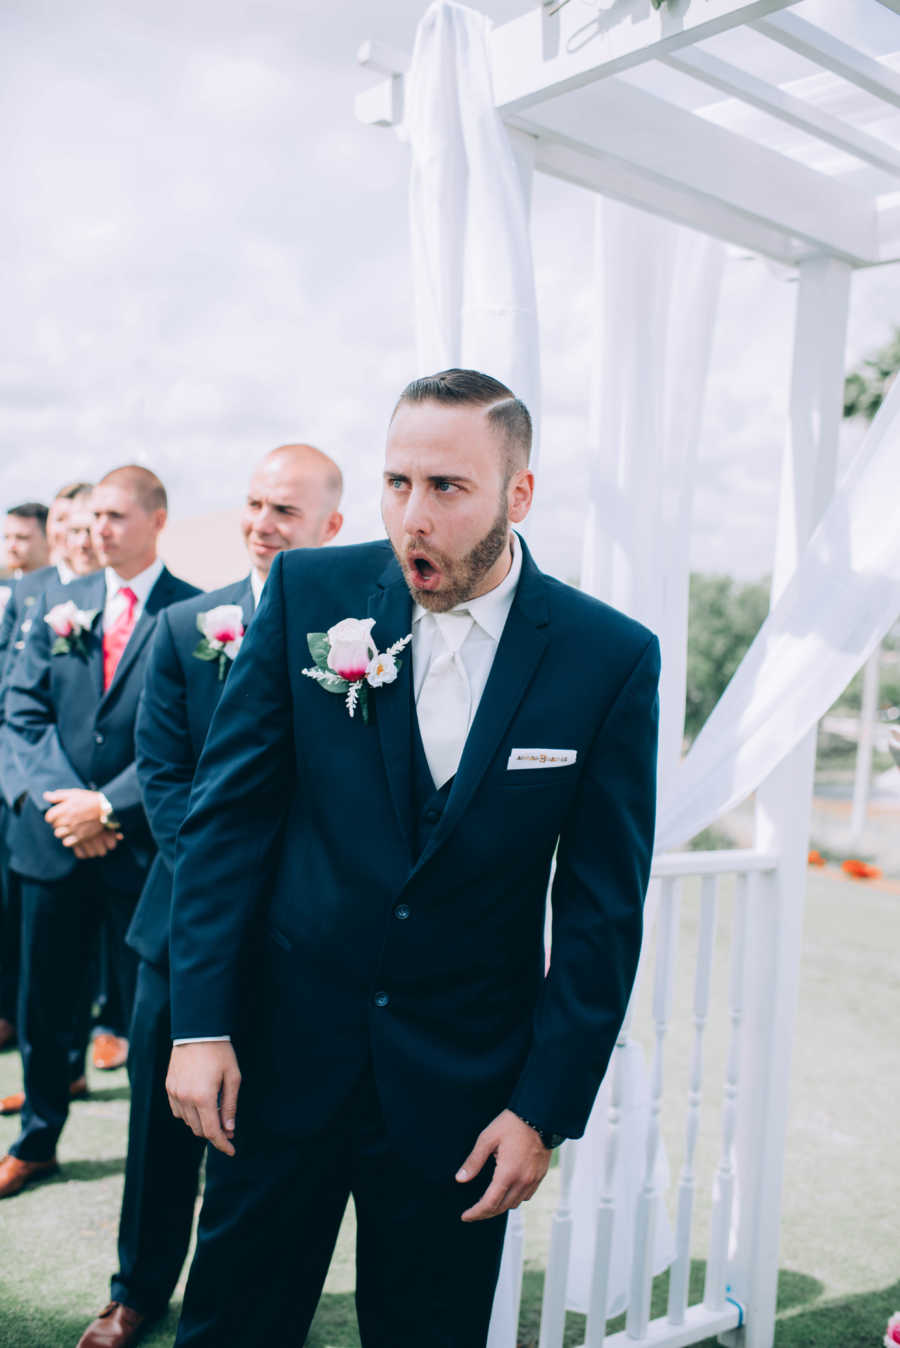 Groom's jaw drops at altar as he sees bride